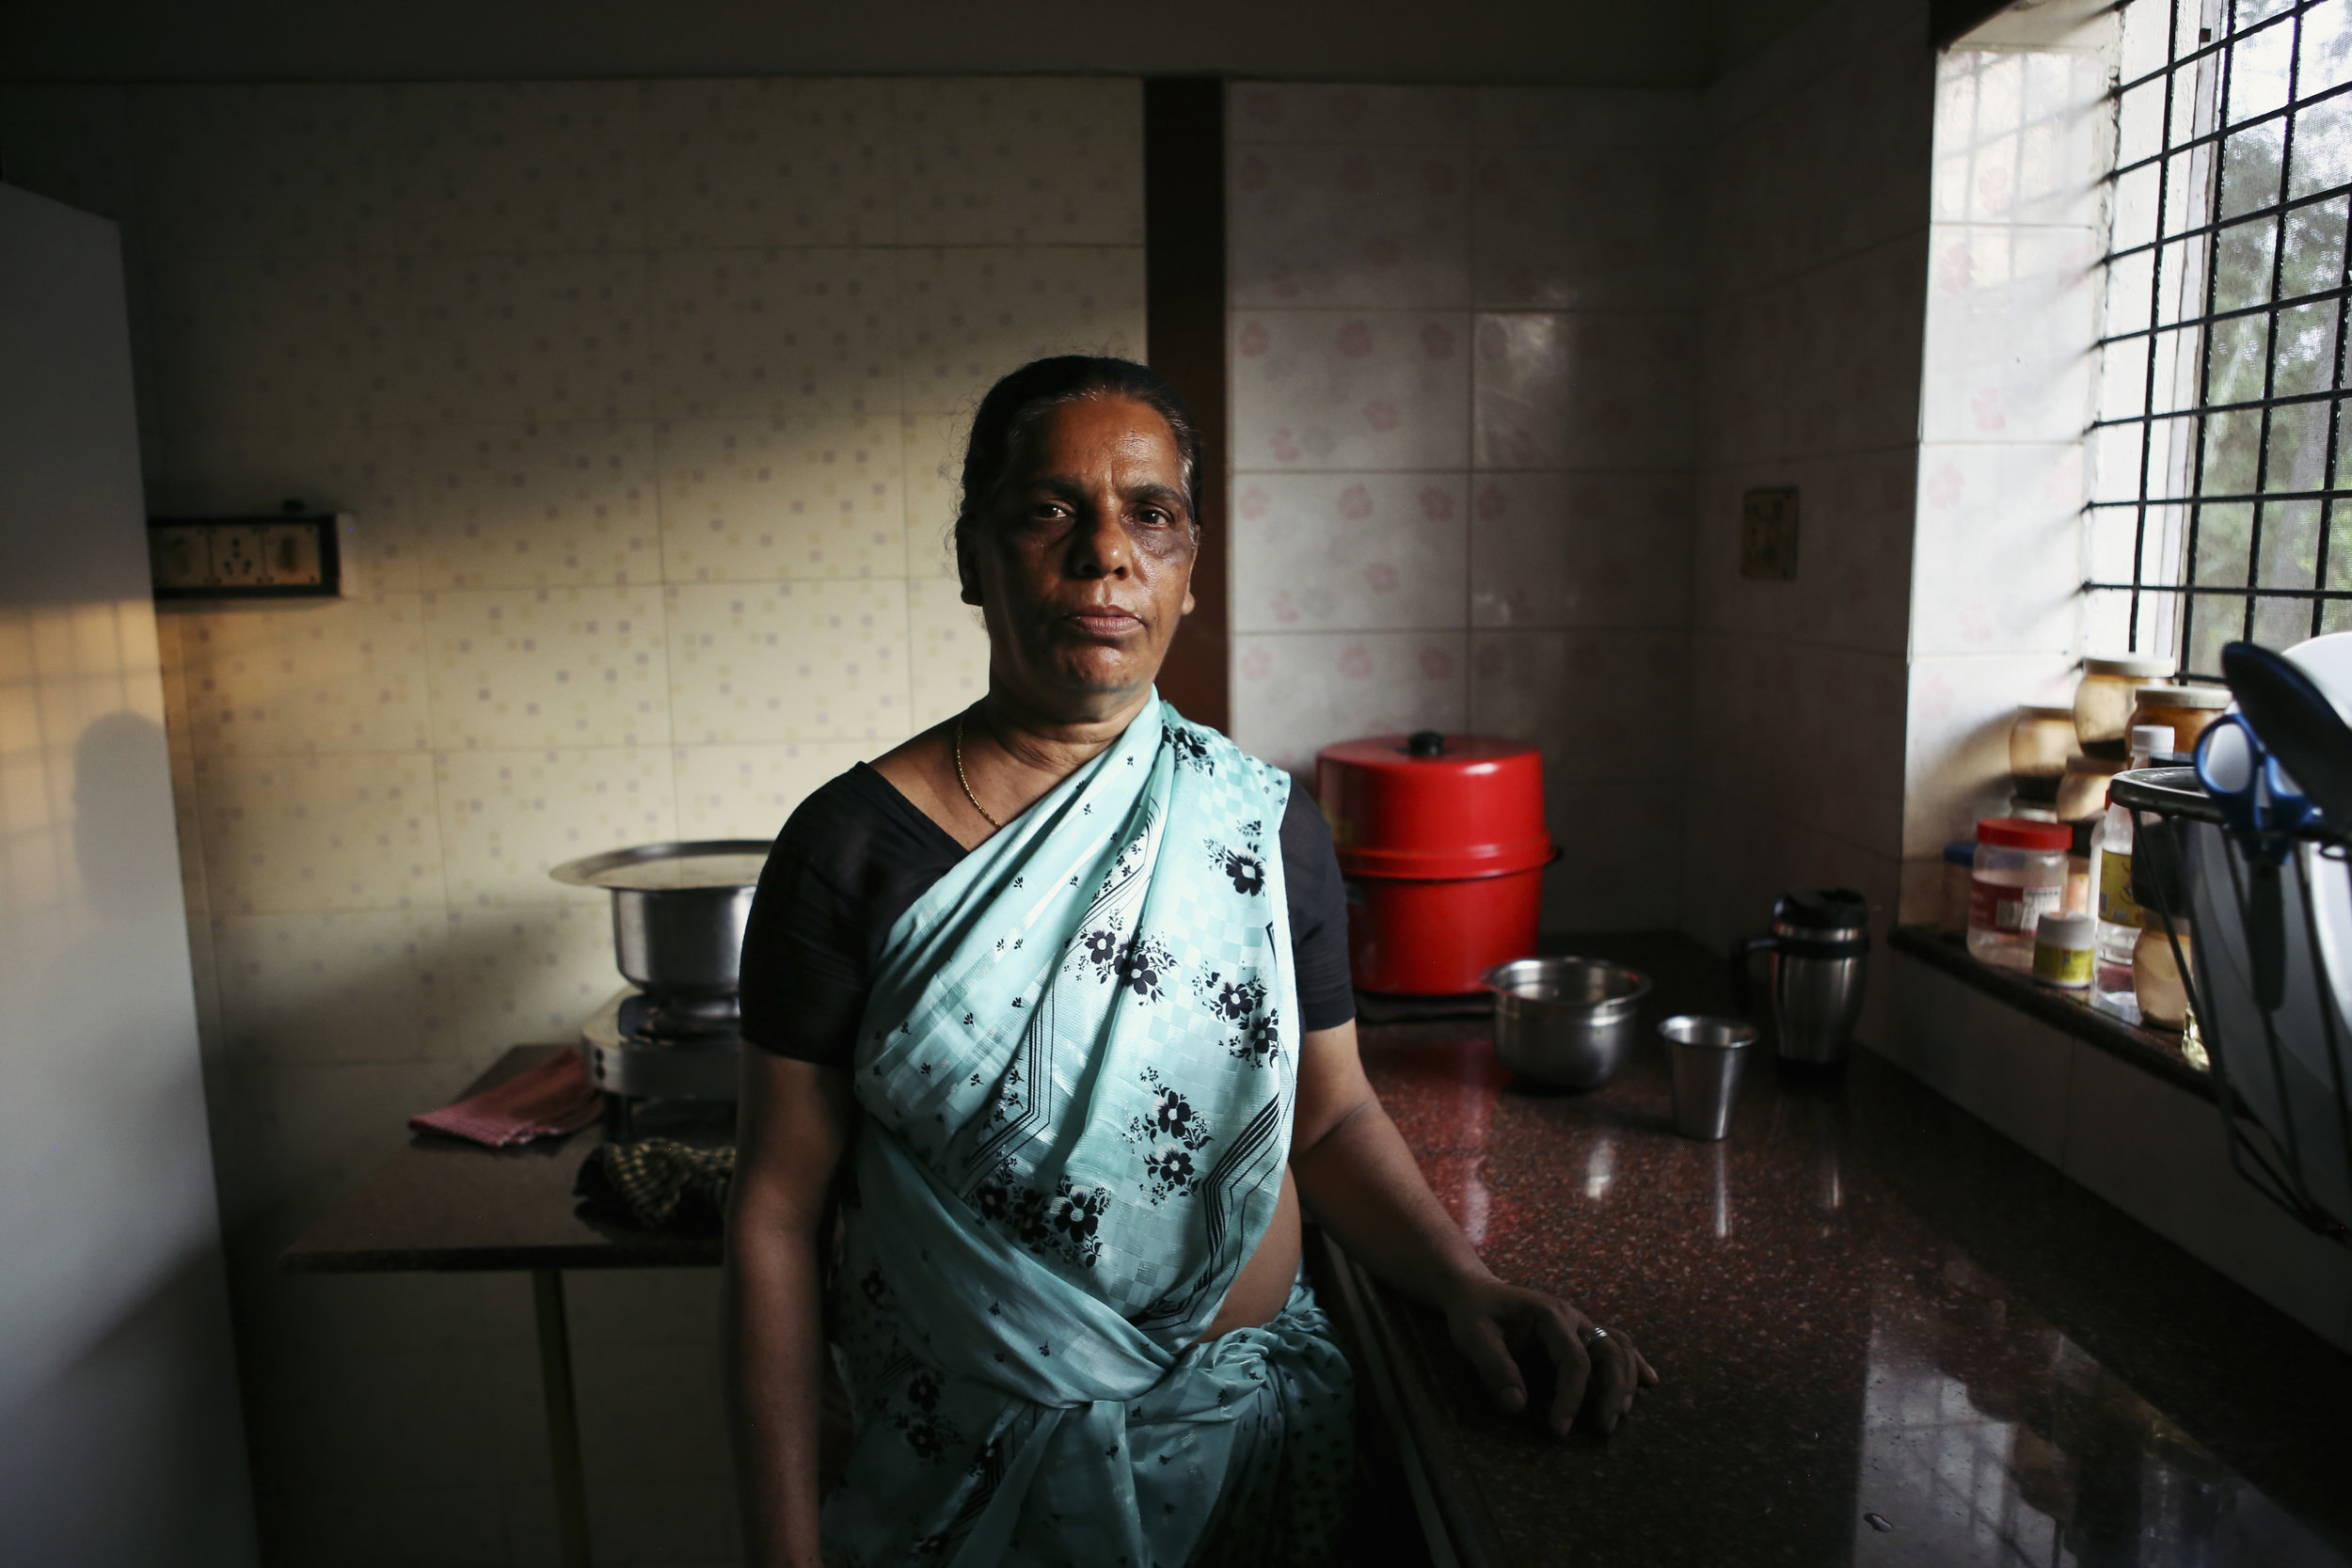  Shamala, a former cook, photographed for   The Maid's Tale(s)   &nbsp;  